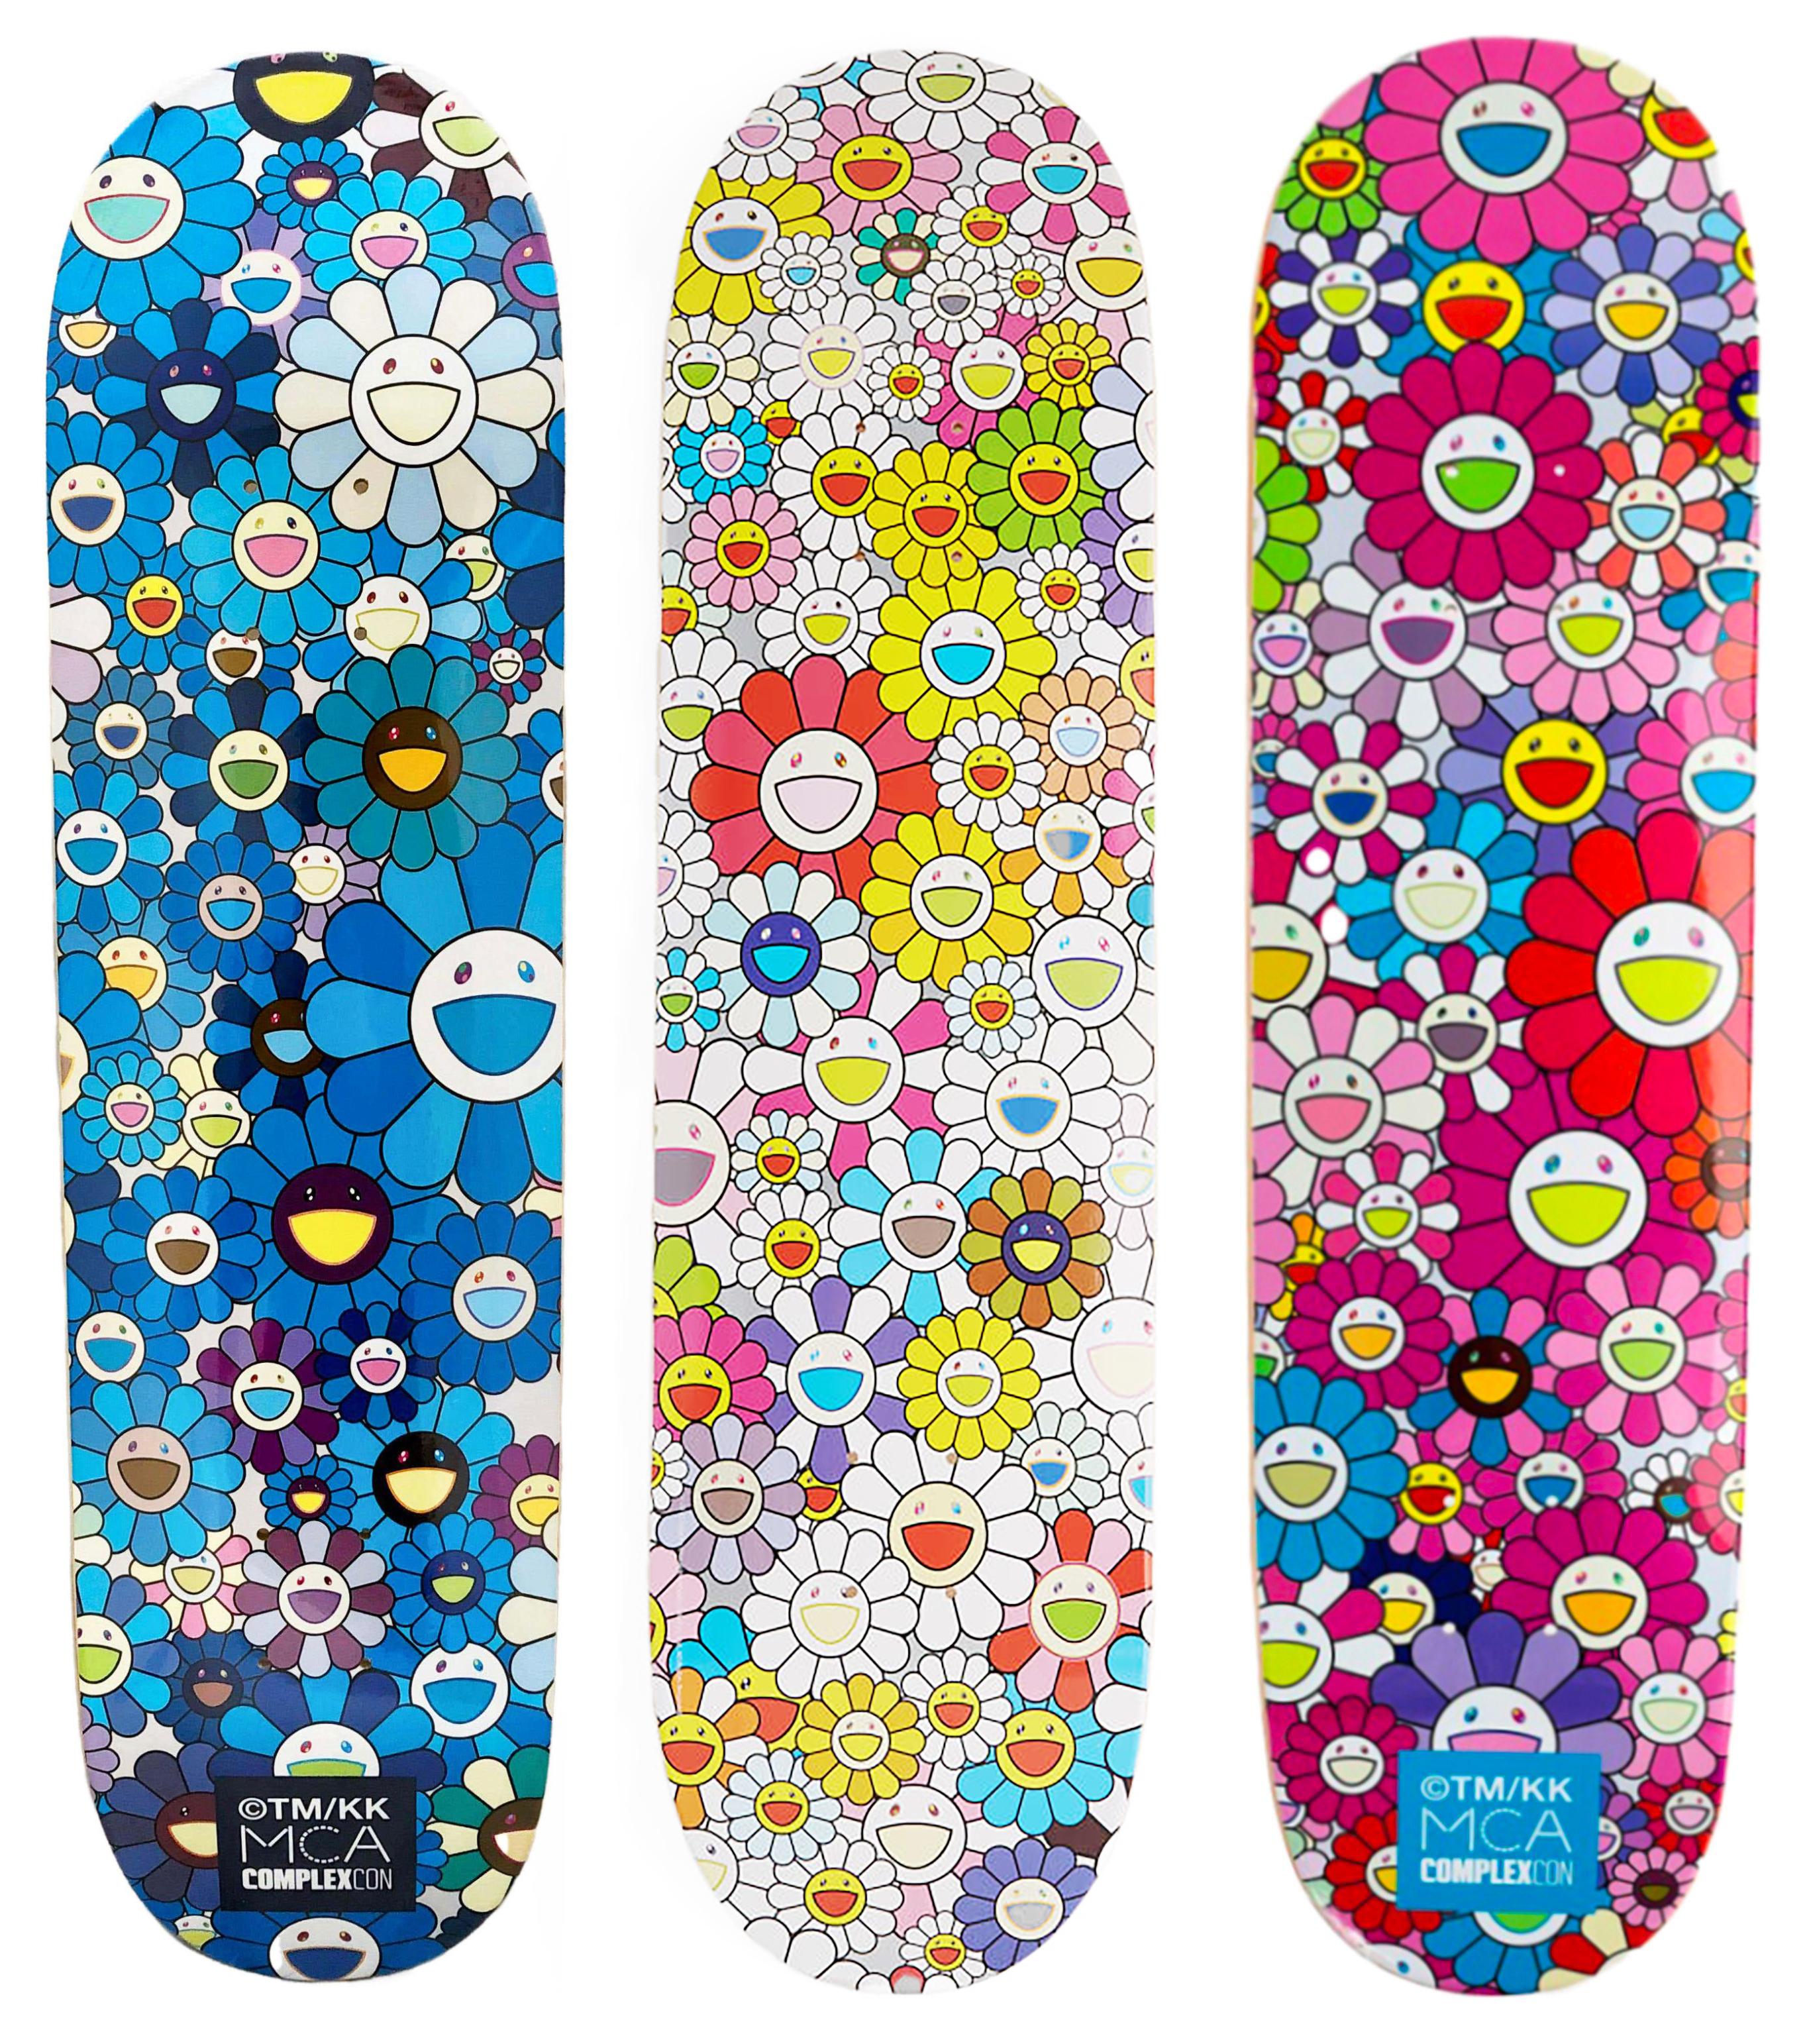 Takashi Murakami Flowers Skateboard Decks: set of 3 works:
Vibrant Takashi Murakami wall art produced as a limited series in conjunction with the 2017 Murakami exhibit: The Octopus Eats Its Own Leg, MCA Chicago (blue & pink) & Vans in 2015 (yellow